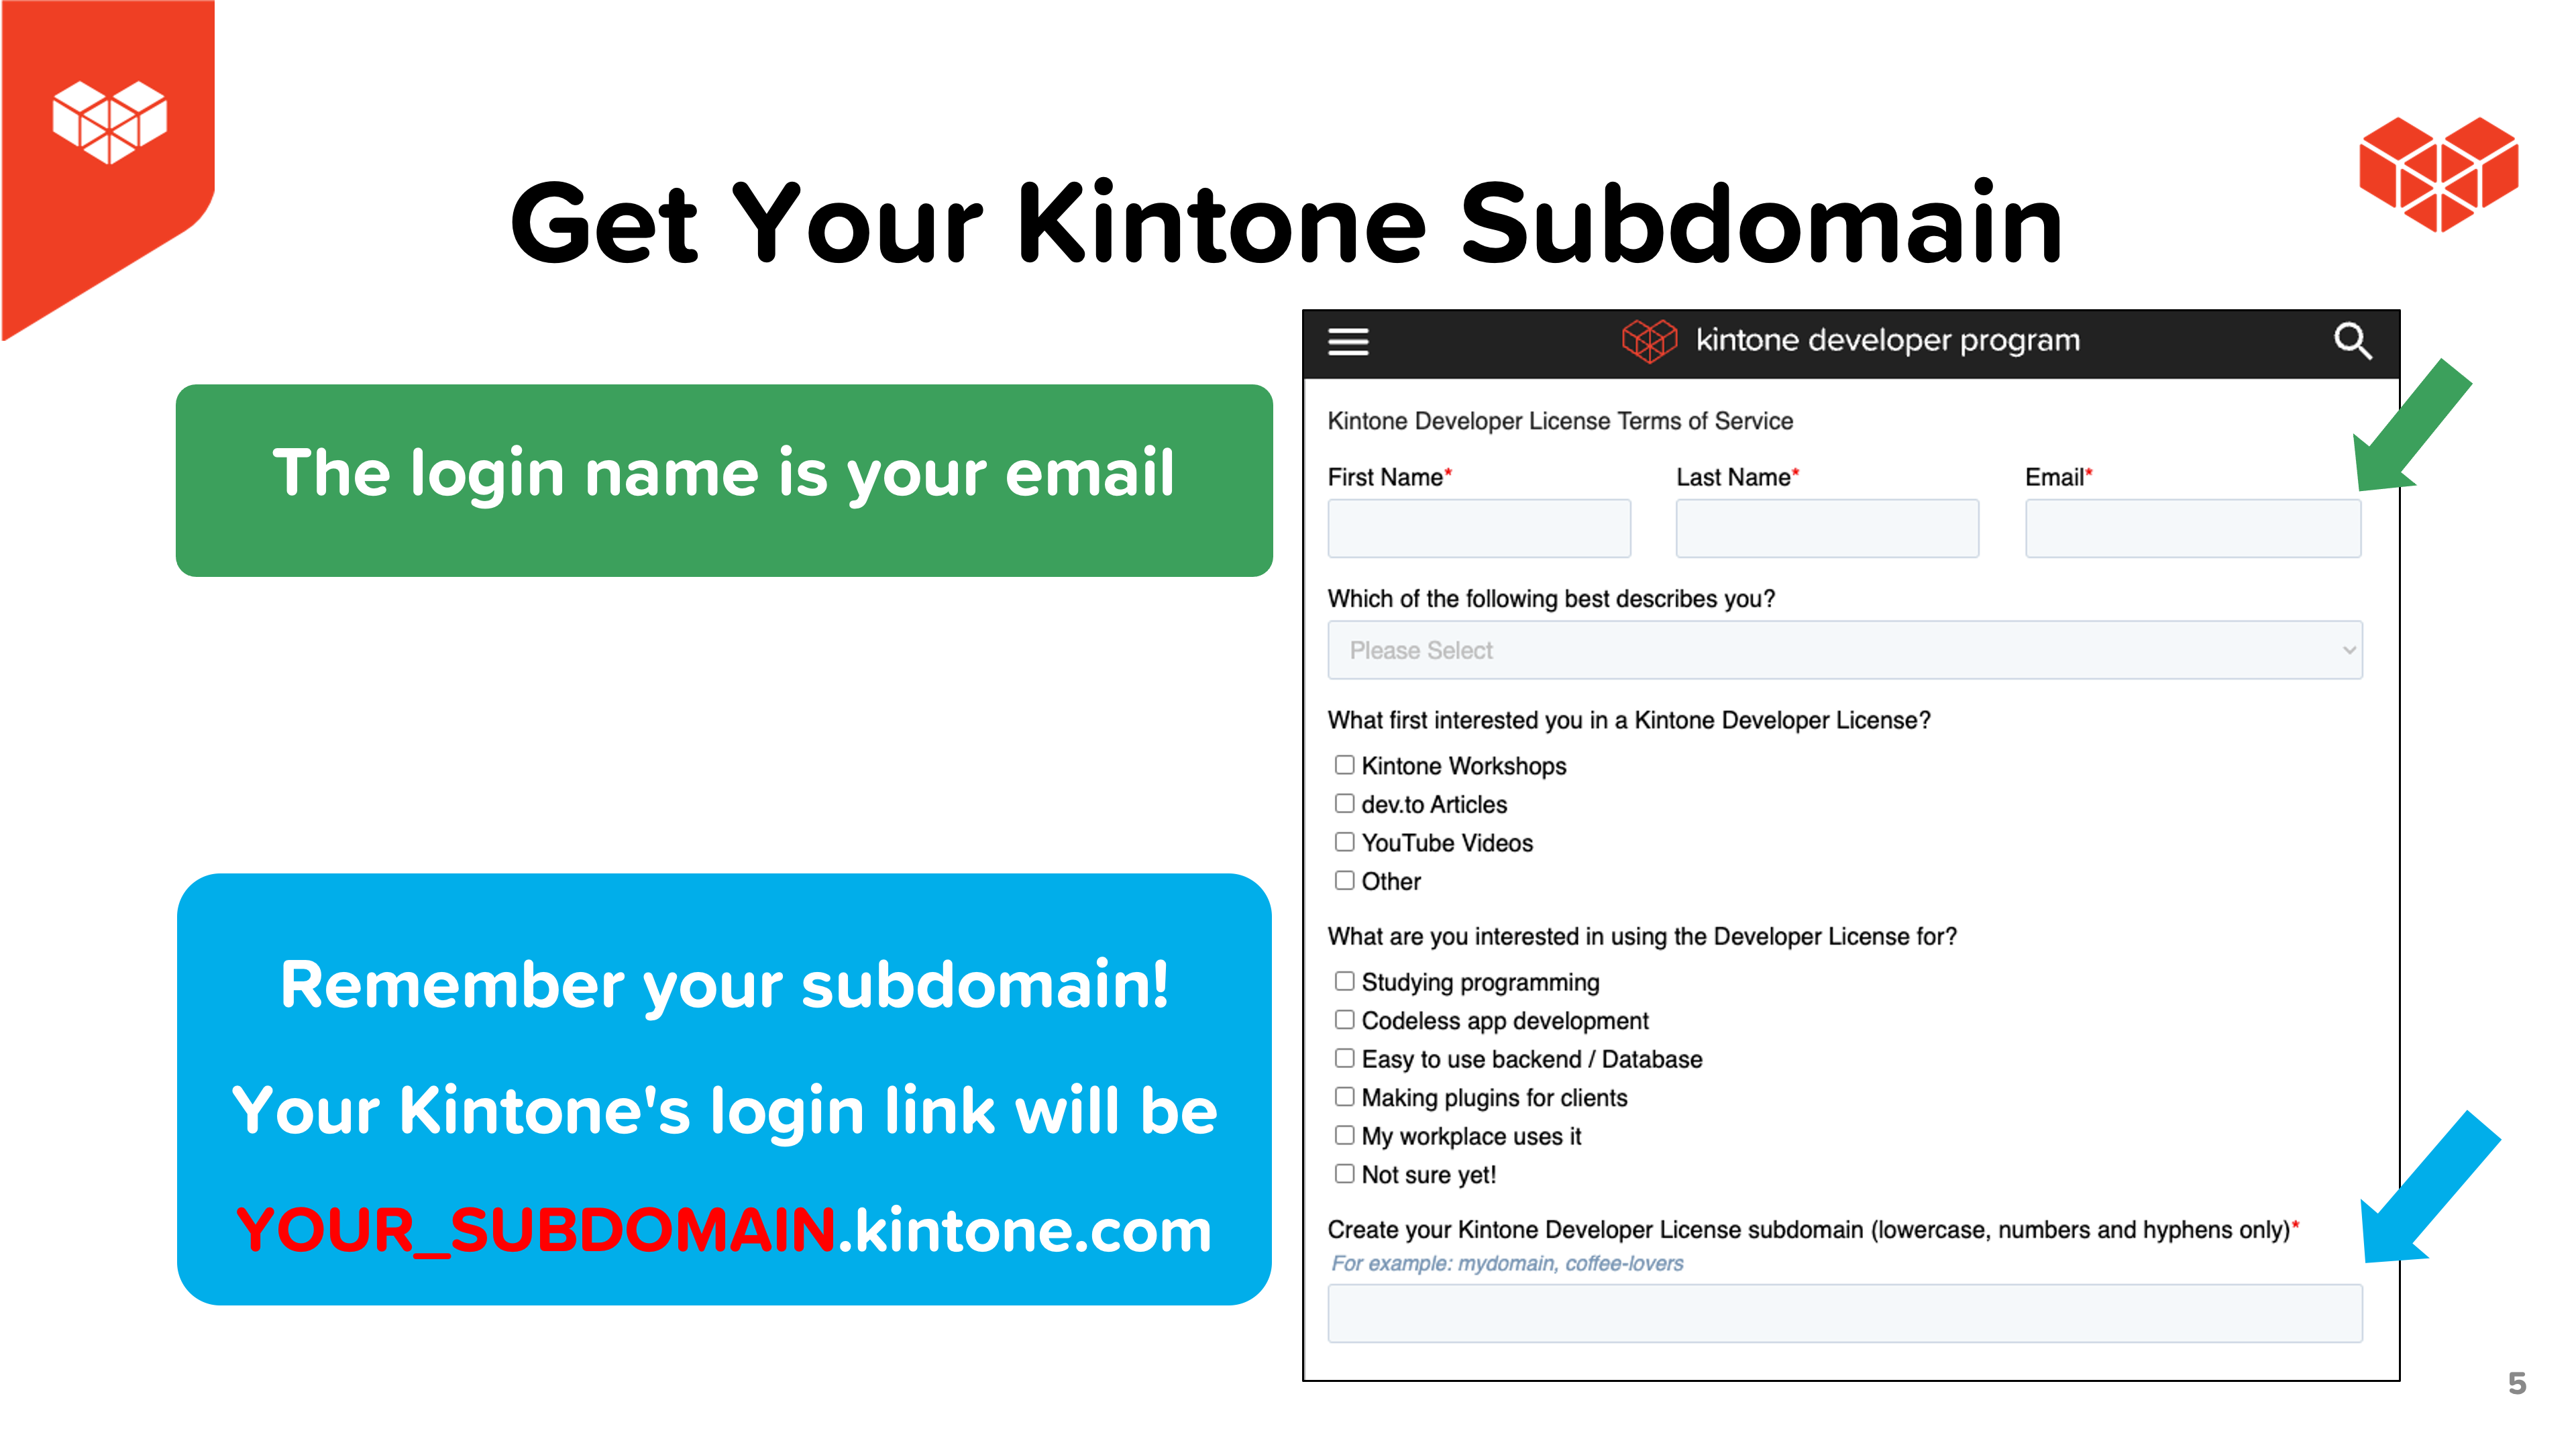 Step 2: Email address will be the login name & the subdomain will be your unique link